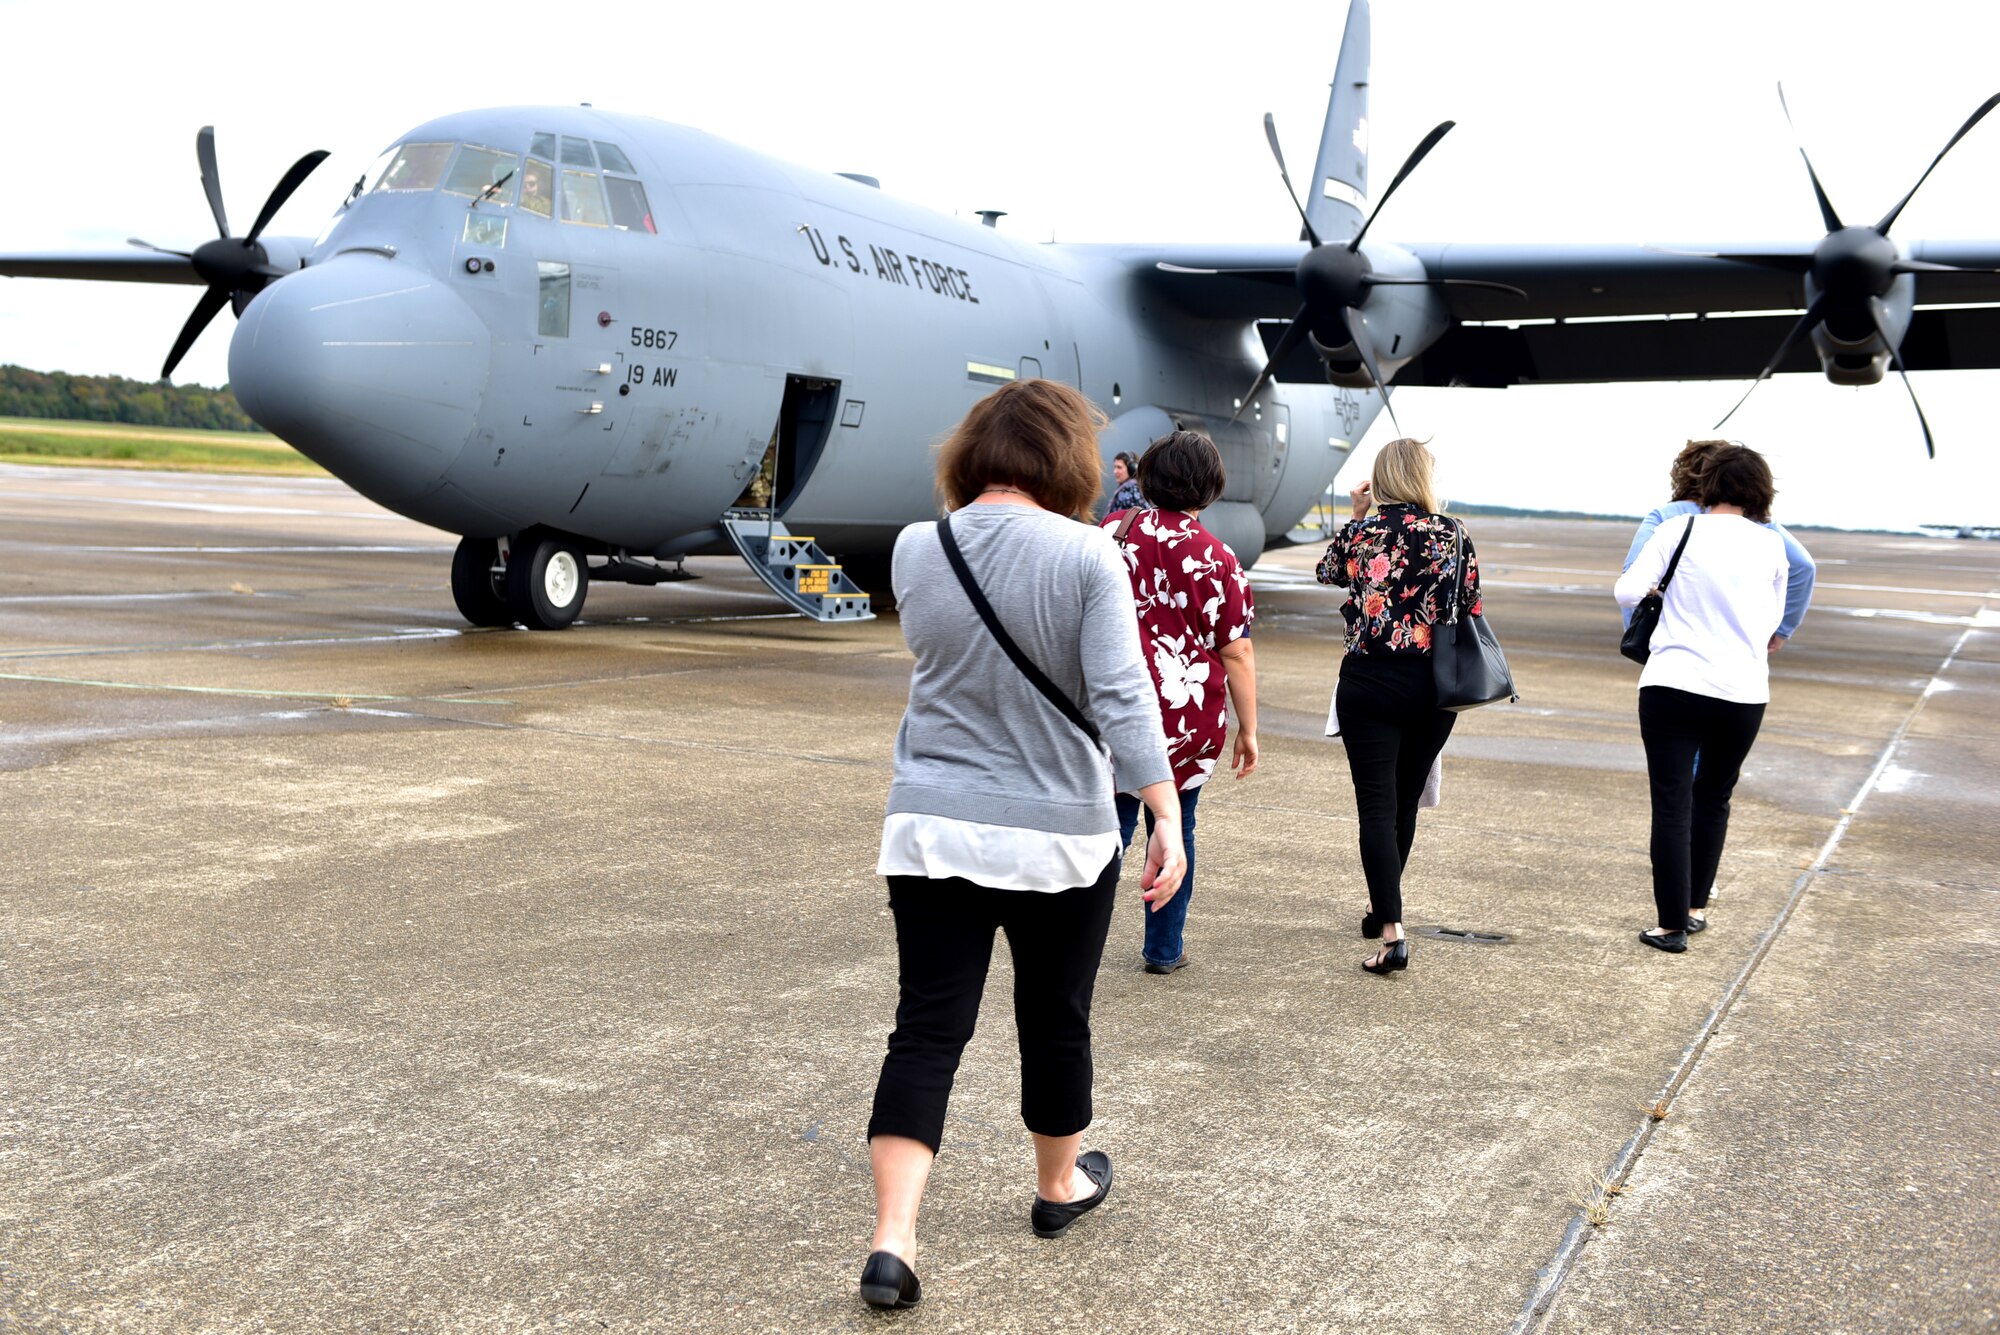 Females walk toward a large grey aircraft on a flight line. The sky is bright and the women are shielding their faces.